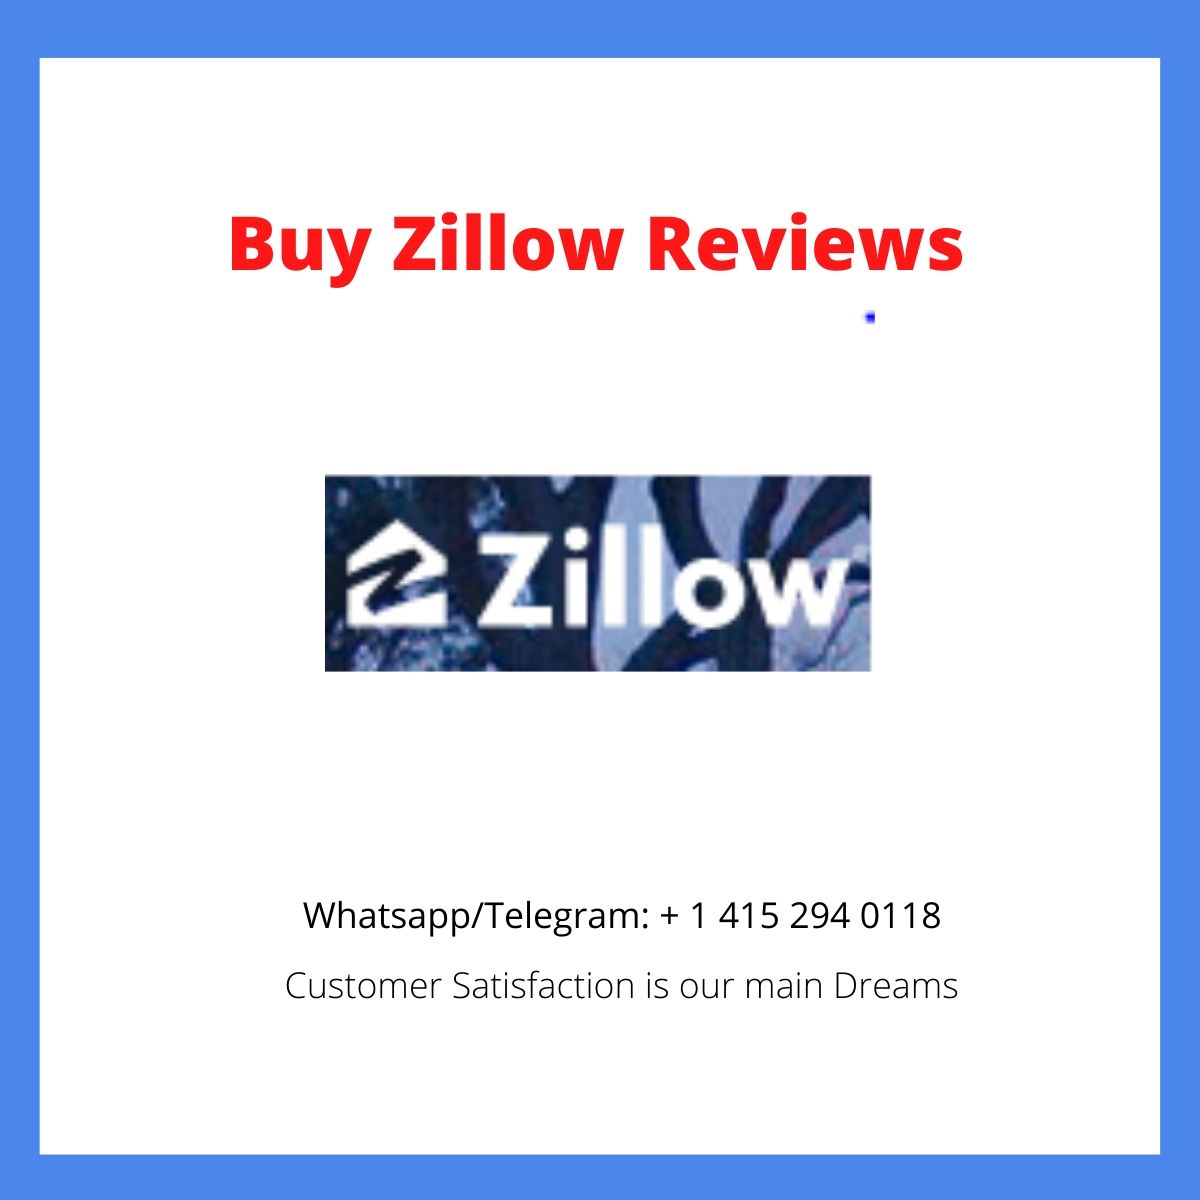 zillow cyndicate listing delay